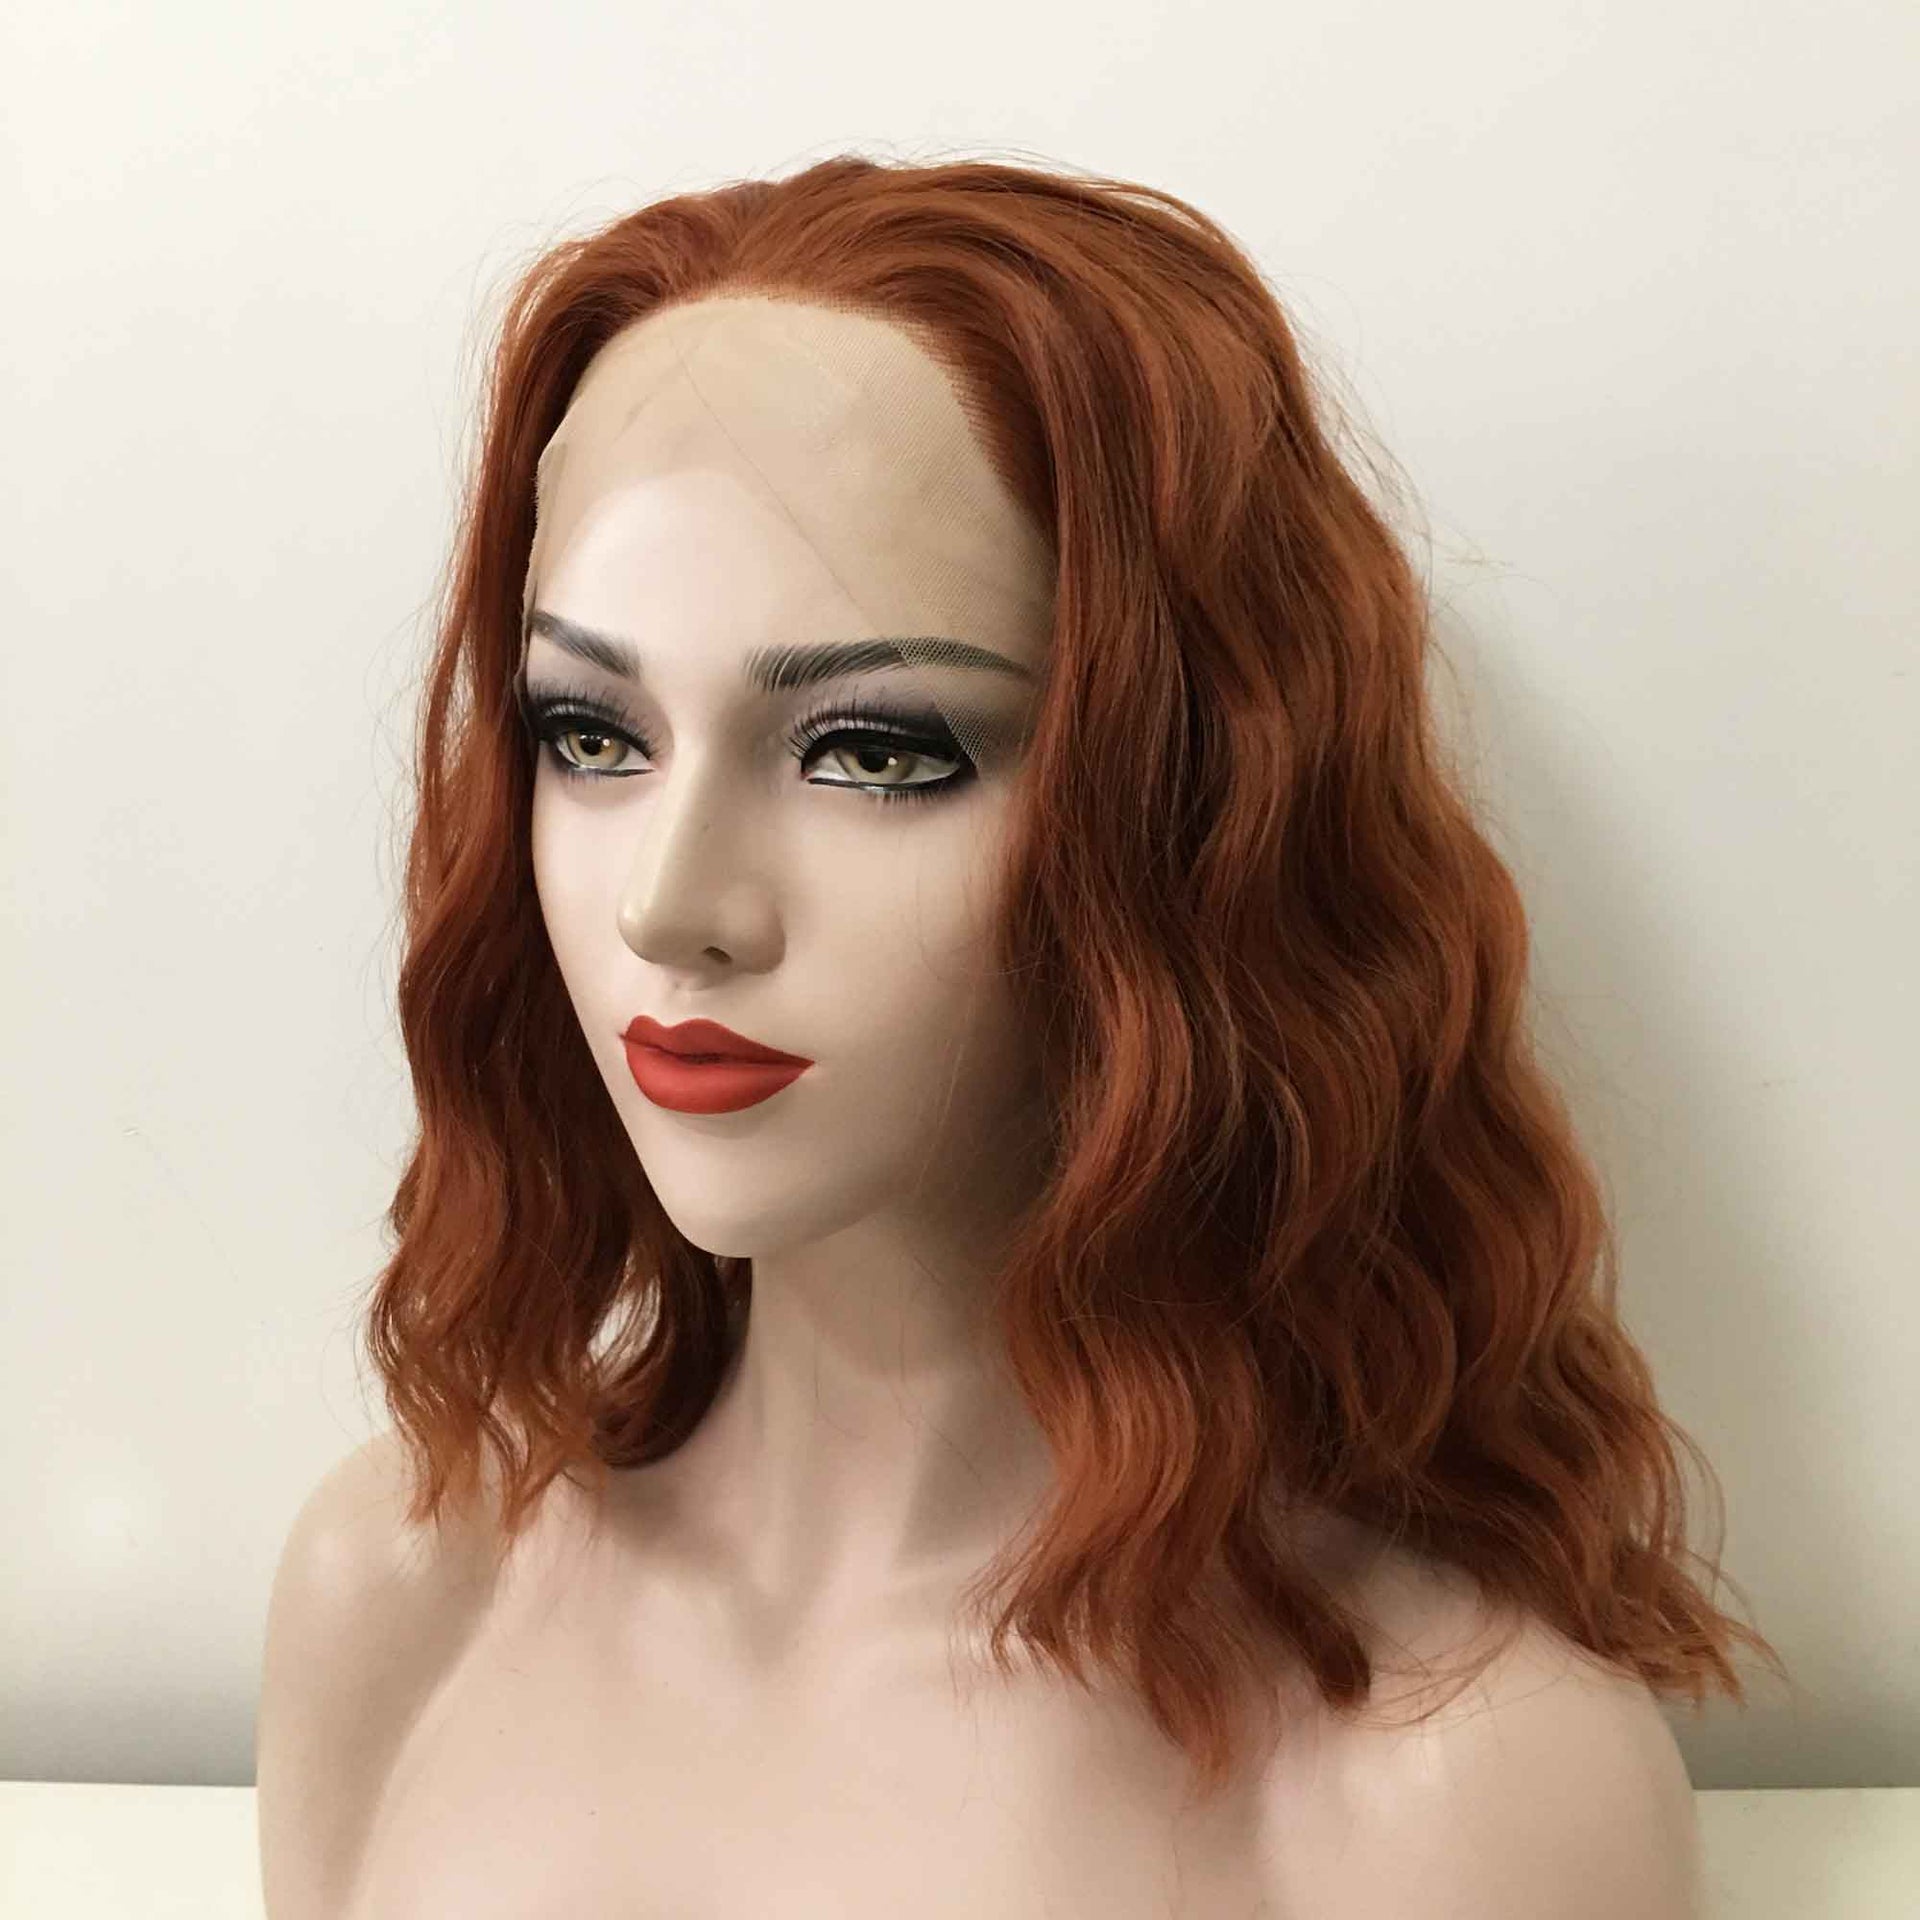 nevermindyrhead Women Auburn Ginger Red Lace Front Medium Length Curly Free Part Wig